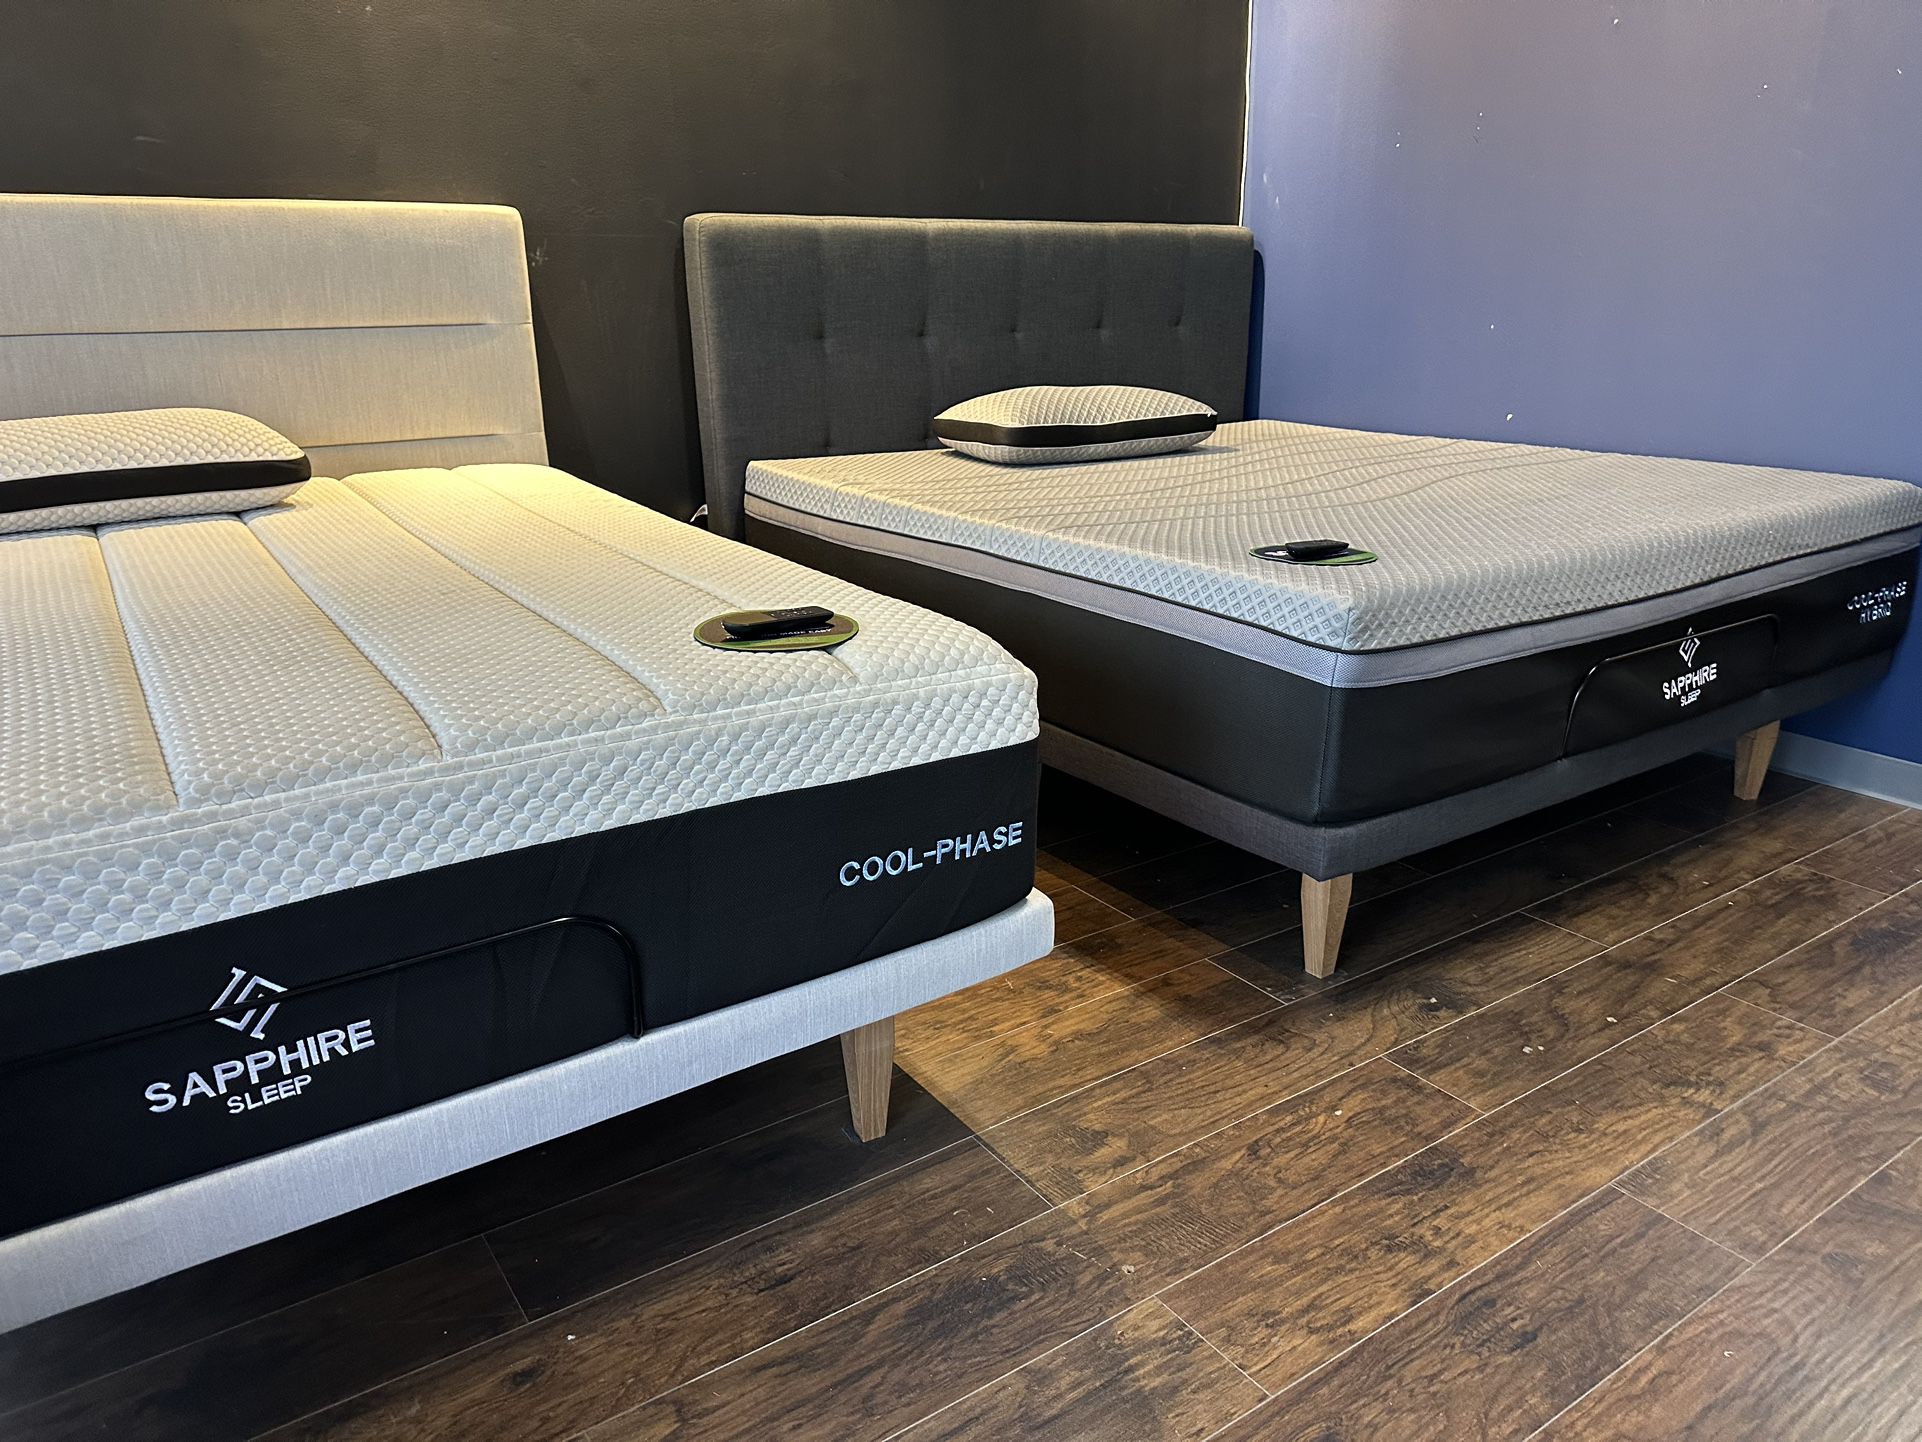 Get a Brand New Mattress Today at Ridiculously Low Prices!